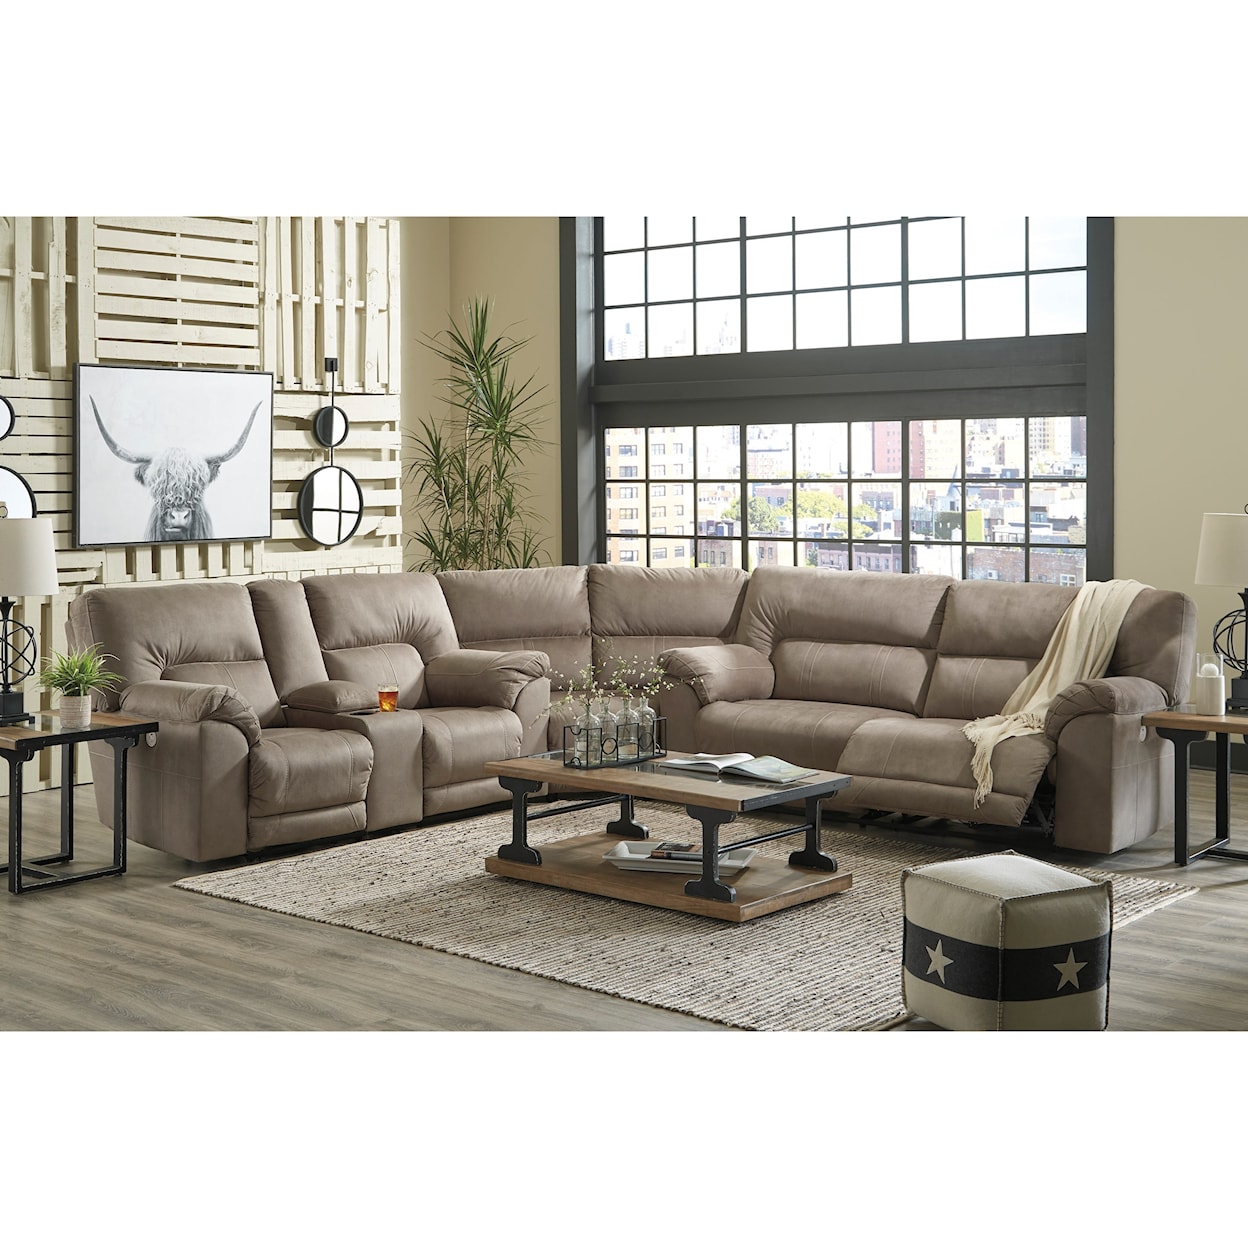 Ashley Furniture Benchcraft Cavalcade Power Reclining Sectional